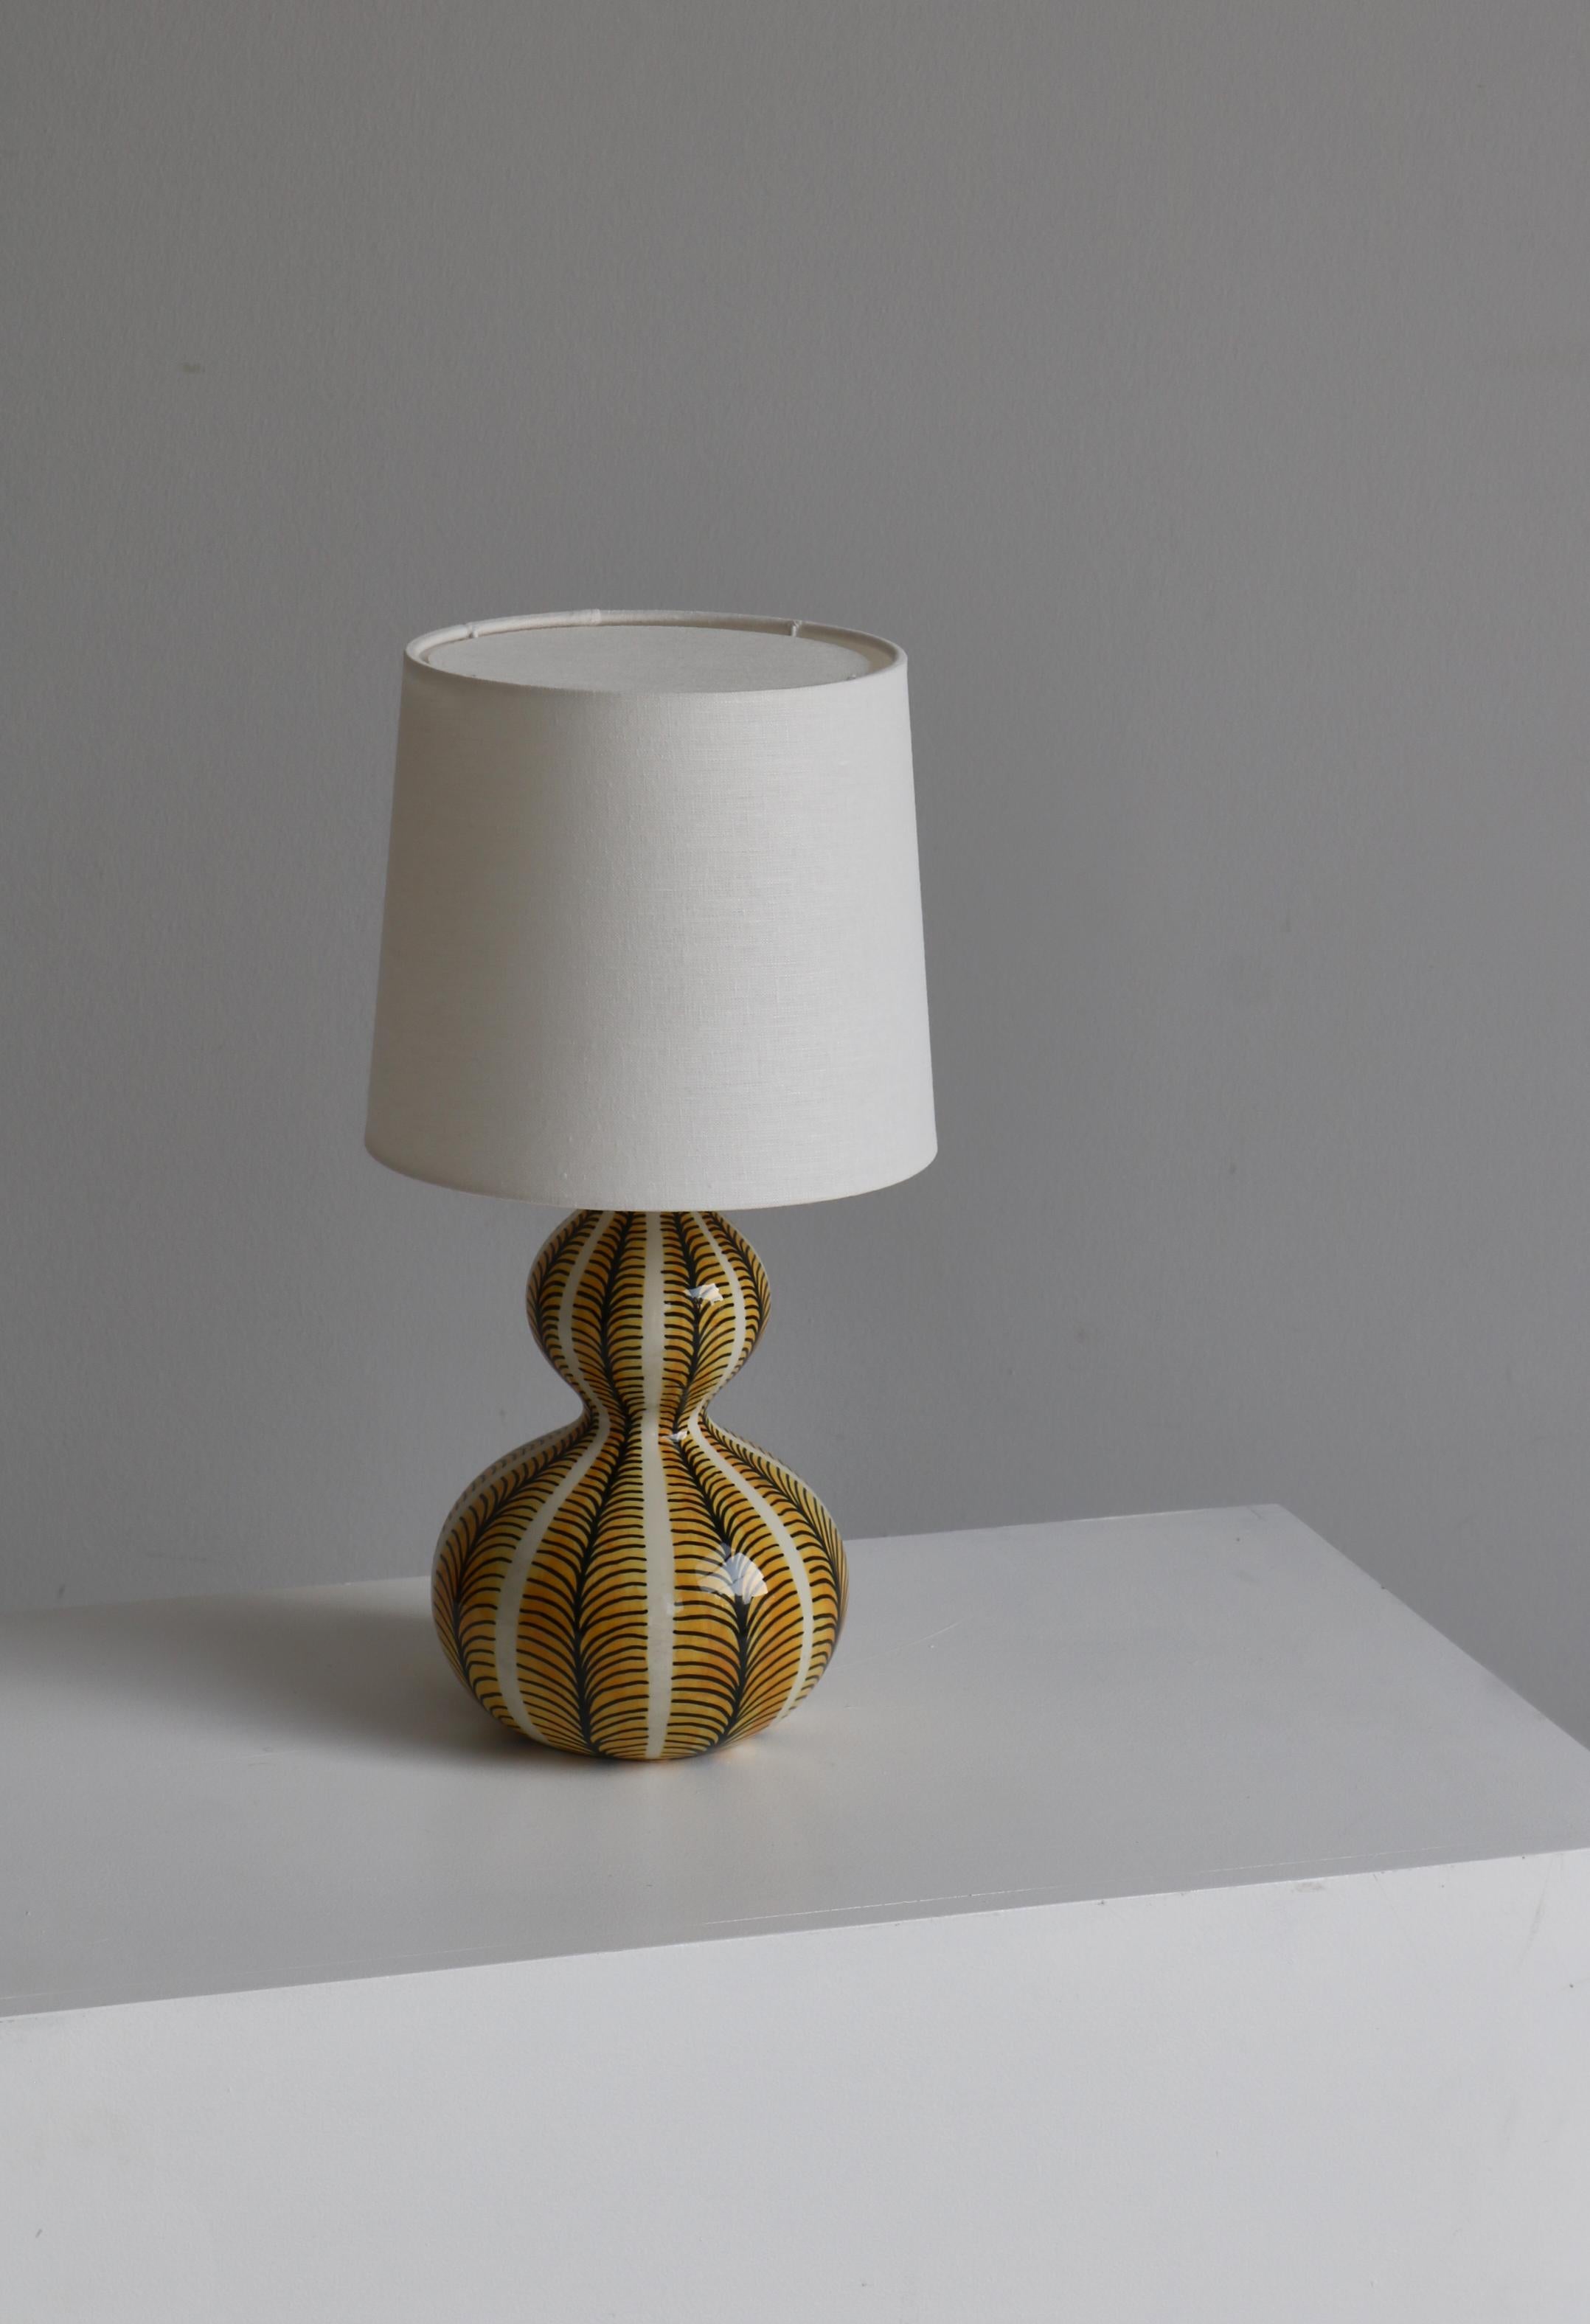 Gourd shaped ceramics table lamp made by Eva & Johannes Andersen in their studio in Copenhagen, Denmark in the 1950s. The lamp is hand decorated and glazed afterwards. Signed 